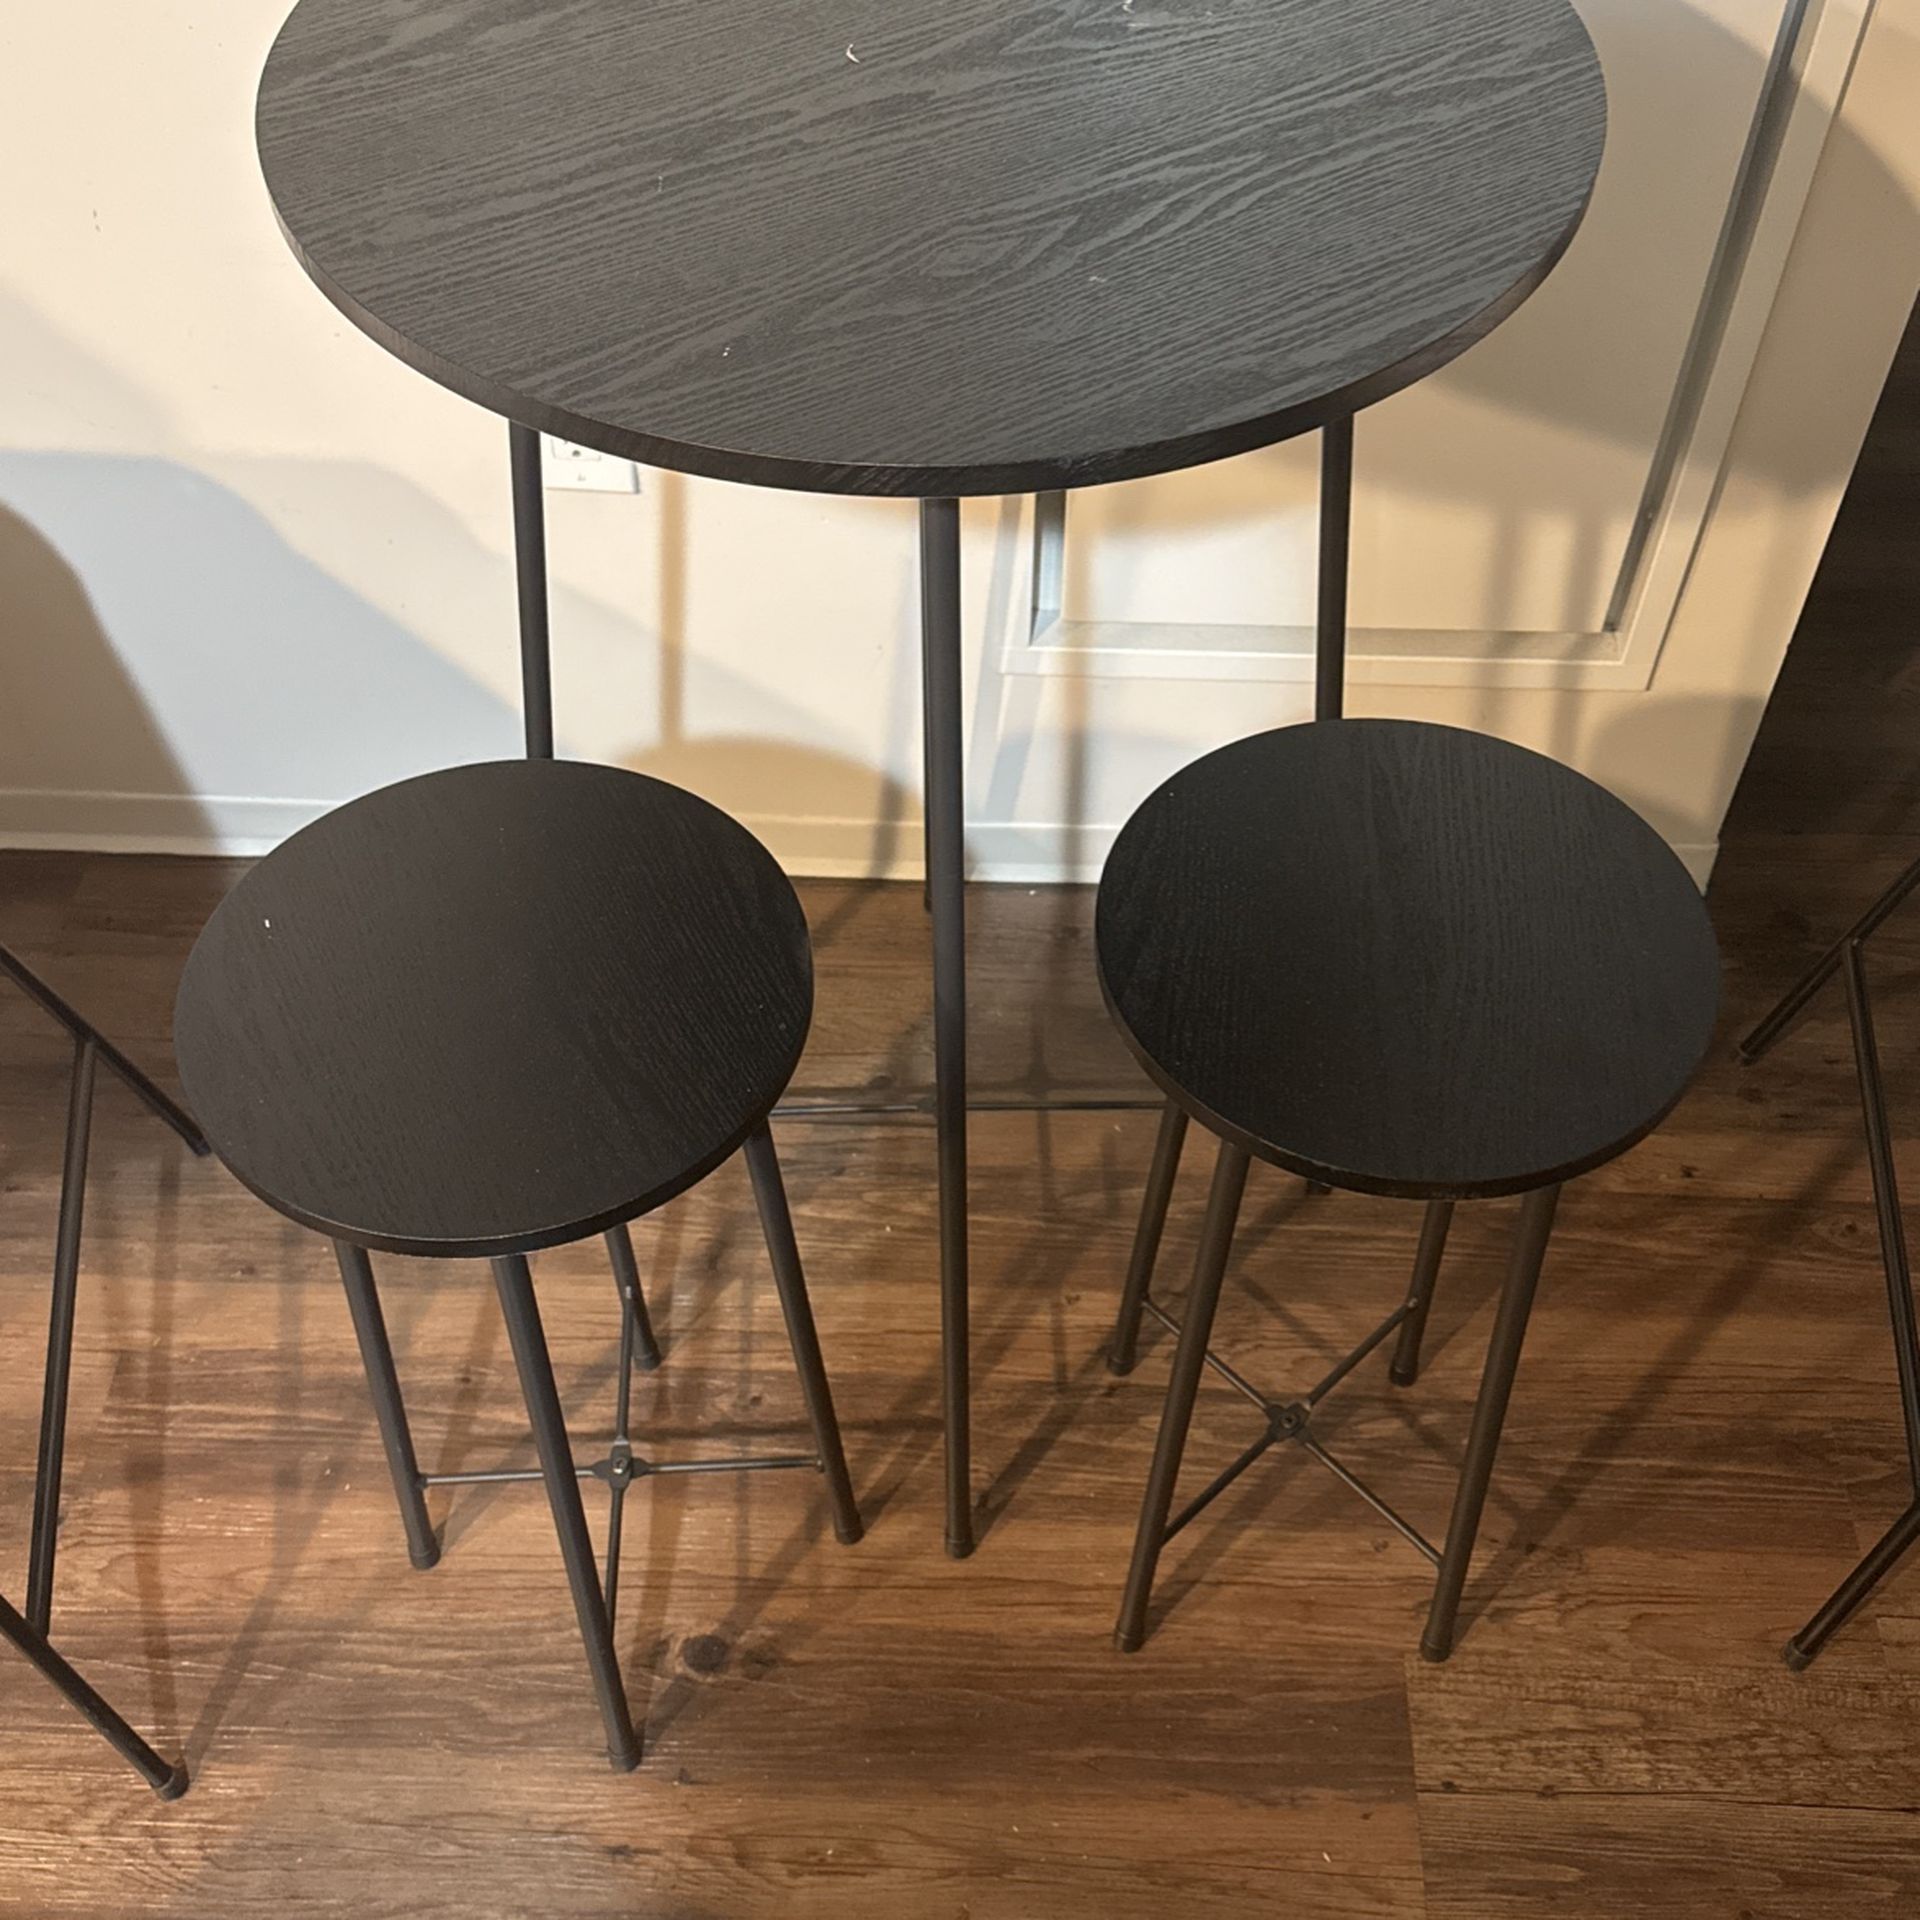 Round Drink Table